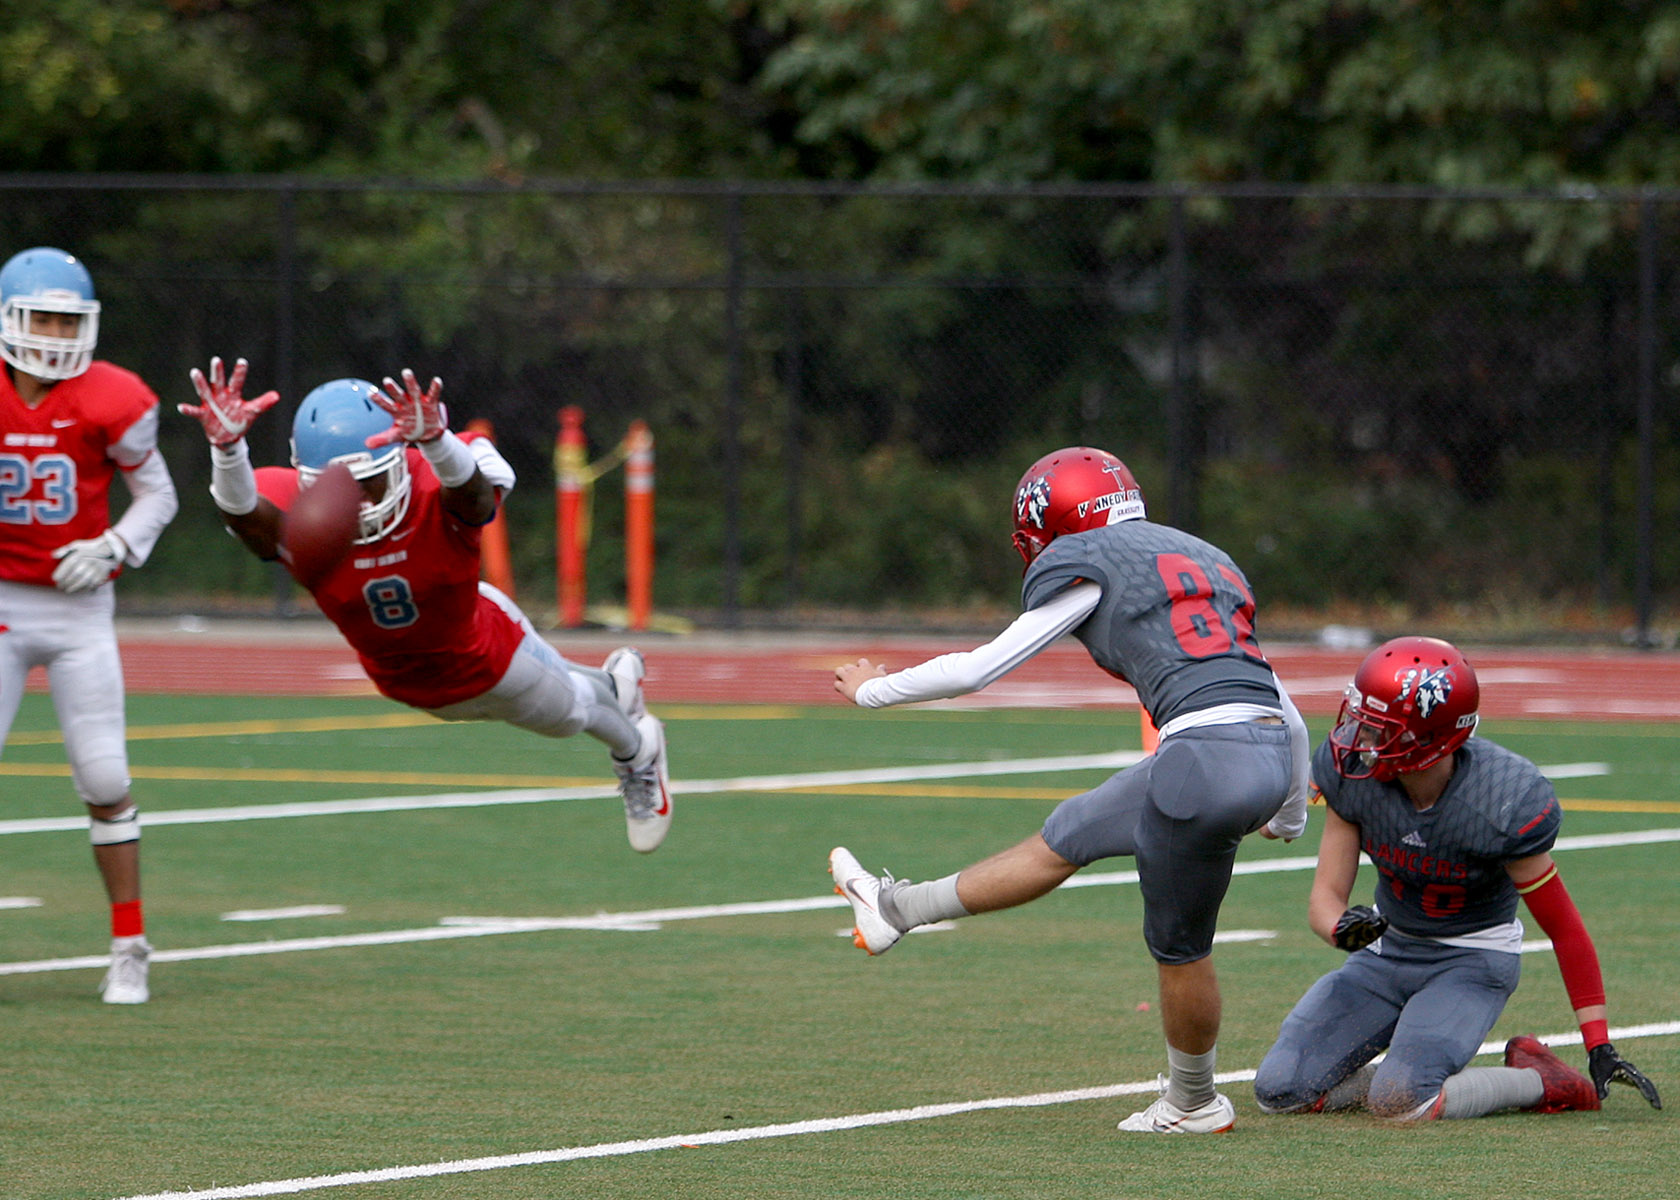 Dontea McMillen of Chief Sealth blocks the extra point attempt by Kennedy's Ethan Grassley.